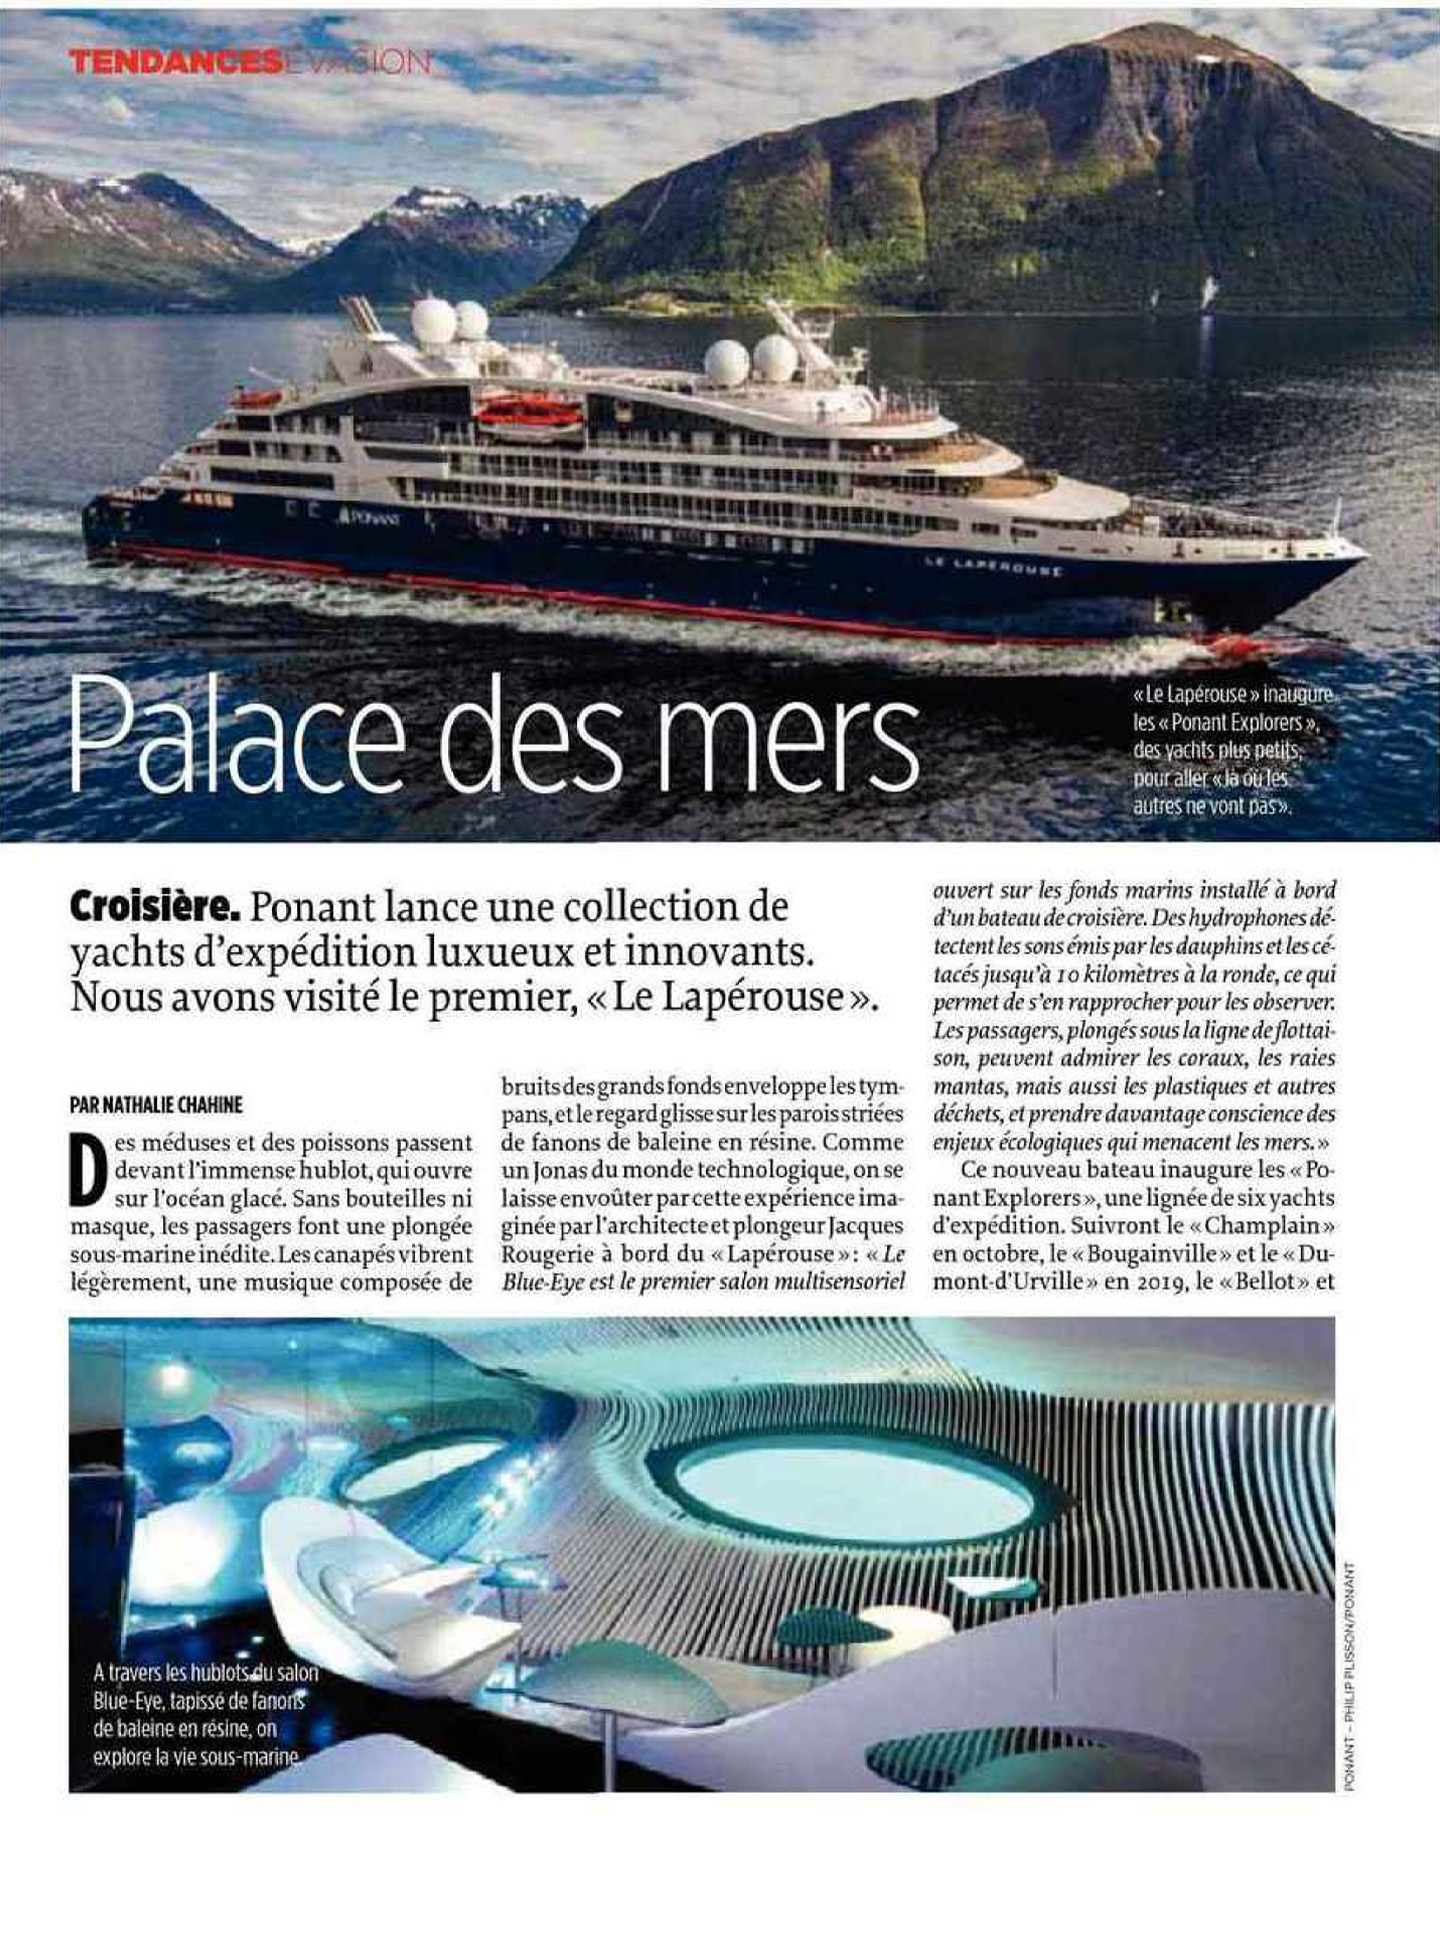 Article on the Lapérouse, a cruise ship designed by the interior design studio jean-philippe nuel in the magazine le point